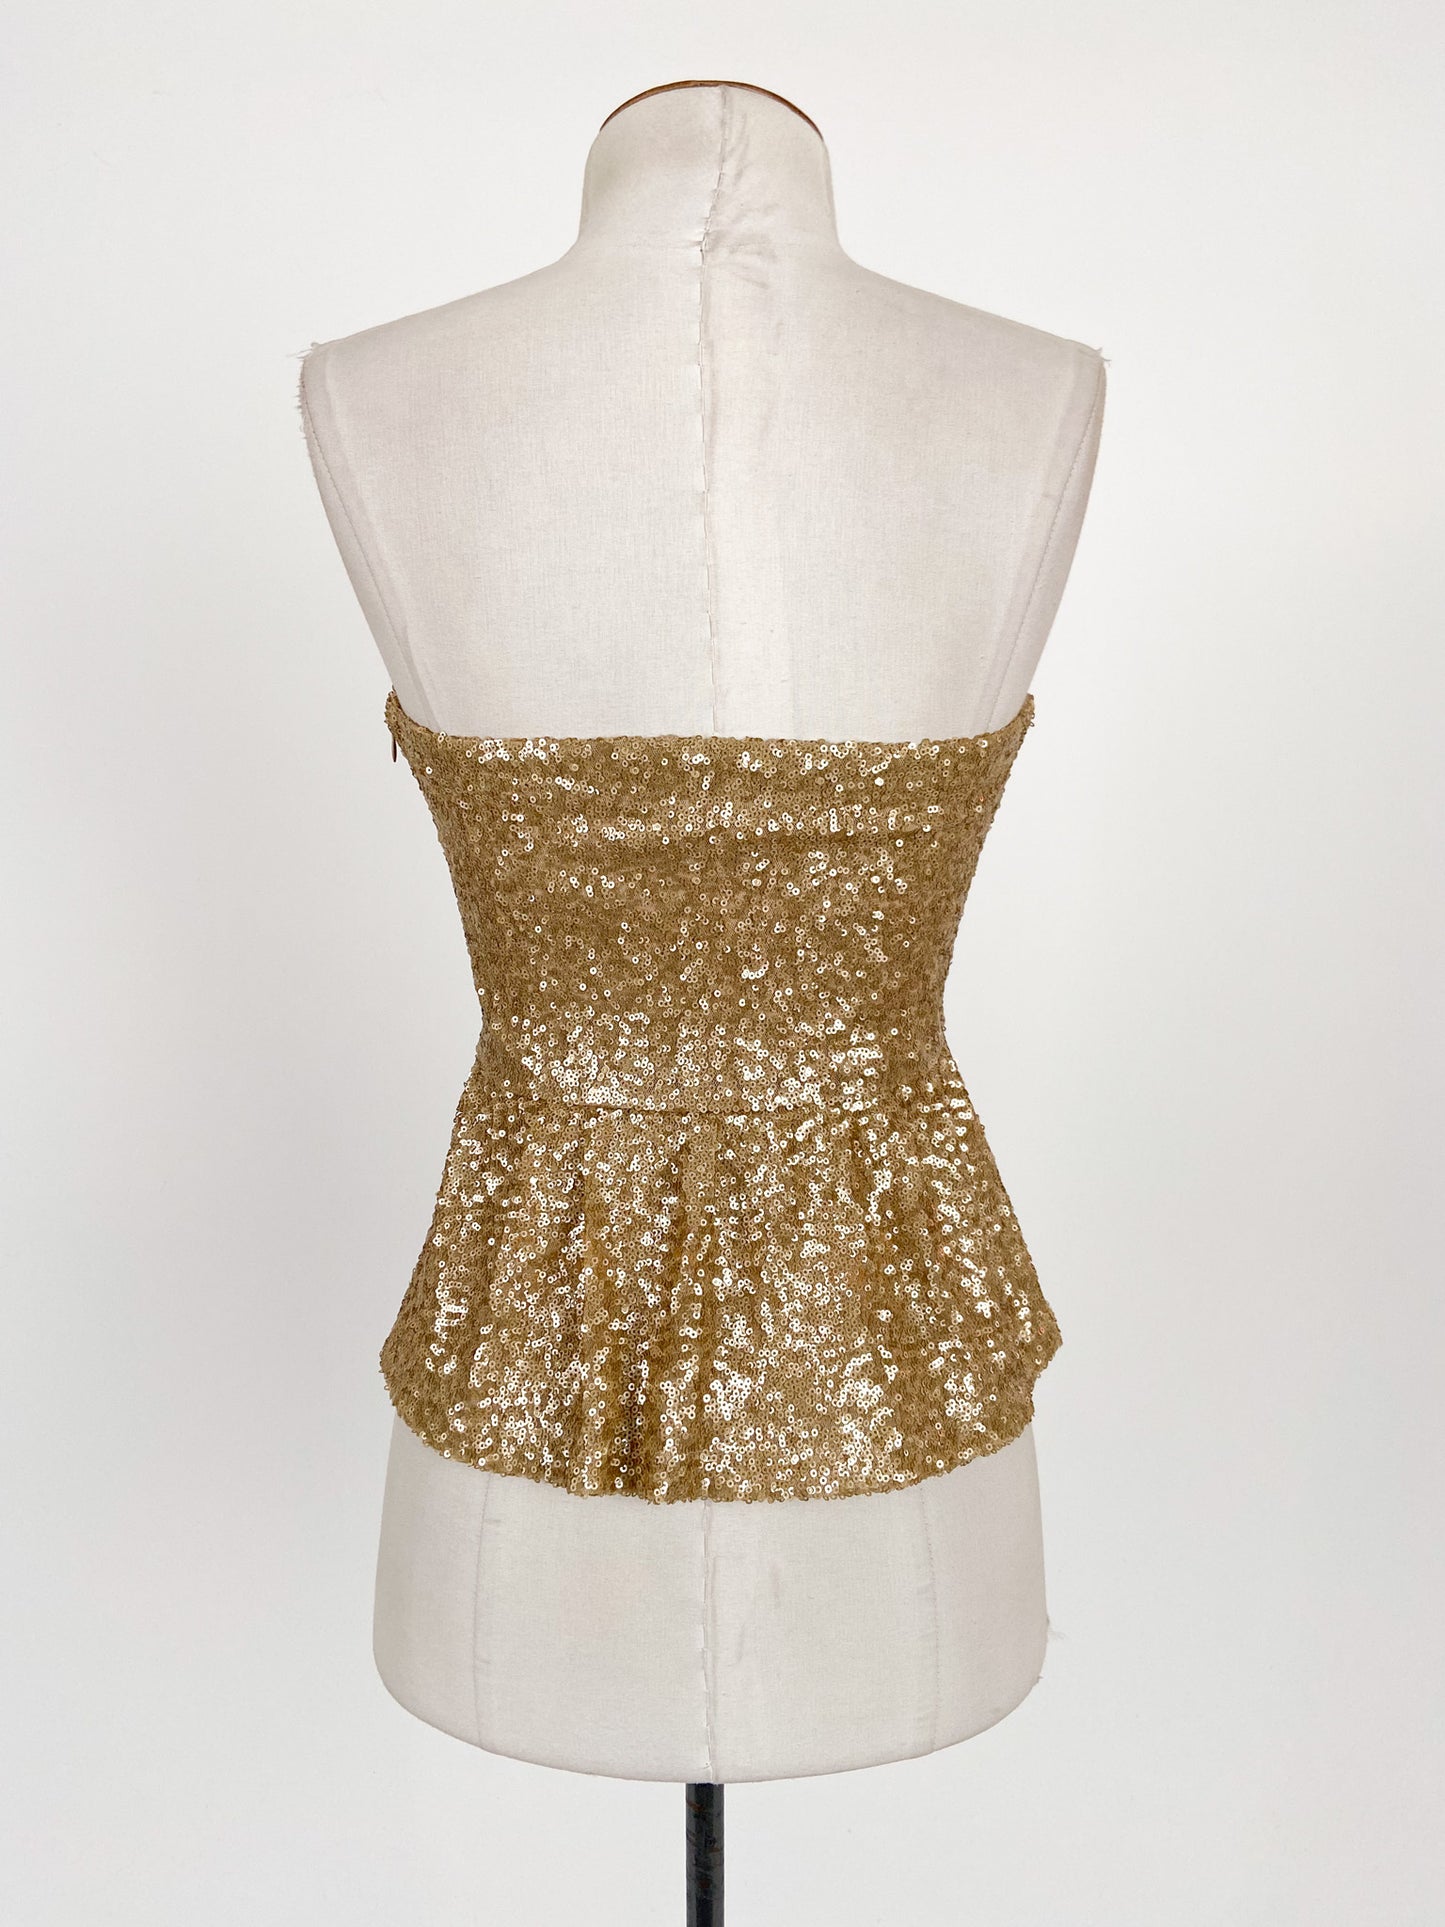 Forever 21 | Gold Cocktail Top | Size S